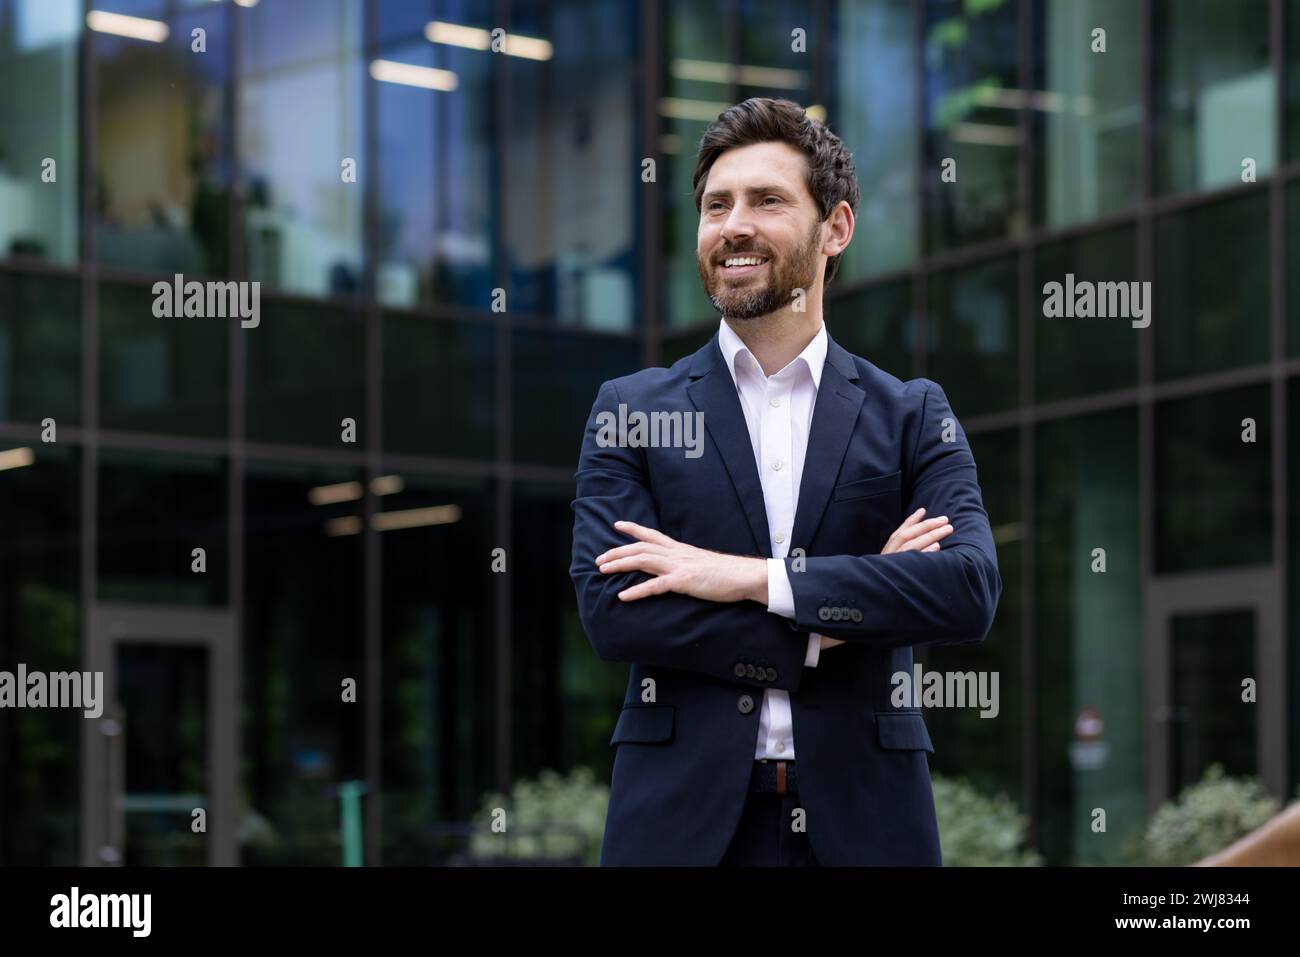 Smiling mature businessman in a suit standing confidently outside a contemporary office building, exuding leadership. Stock Photo